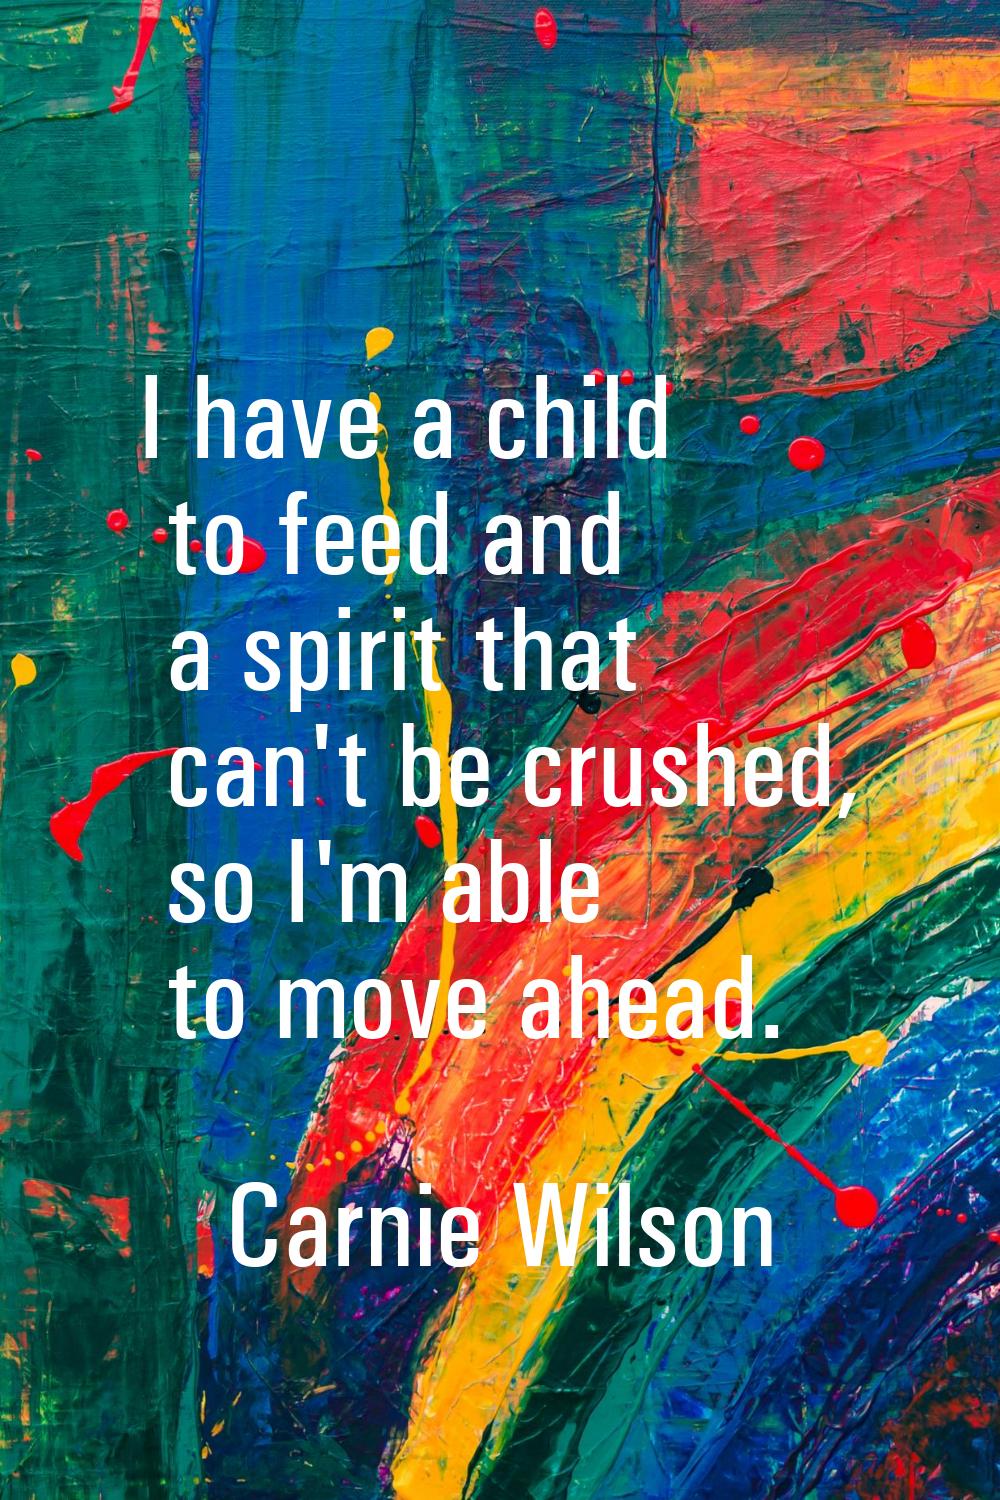 I have a child to feed and a spirit that can't be crushed, so I'm able to move ahead.